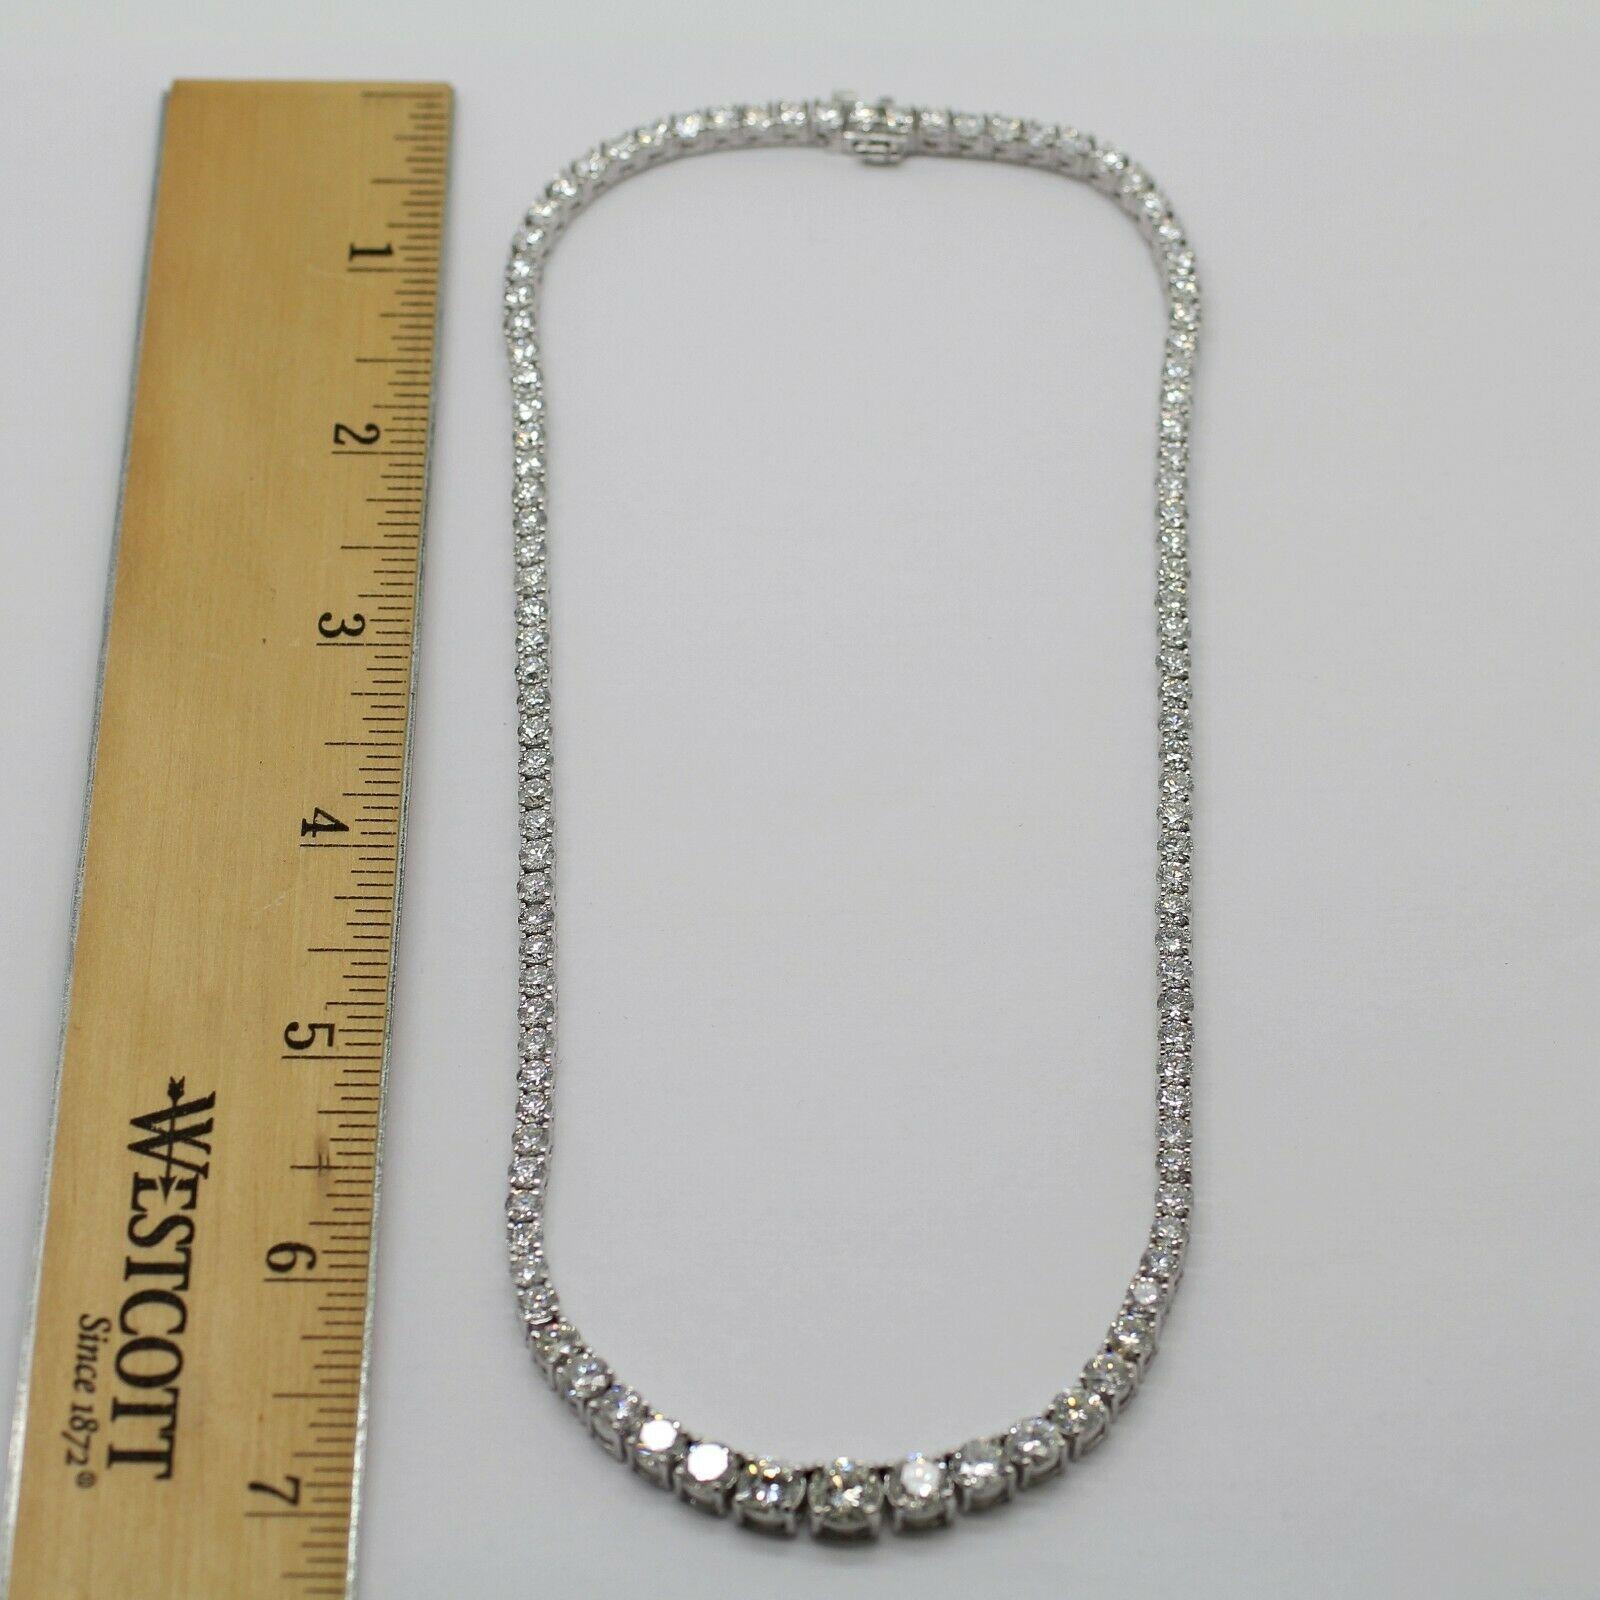 Specifications:
    main stone:ROUND DIAMONDS
    diamonds:105 PCS
    carat total weight: 23.85 CTTW
    color: F-I
    clarity:VS-SI2
     6 stones are certified (GIA , eglusa)
    brand:custom
    metal:14K  WHITE gold
    type: NECKLACE
   